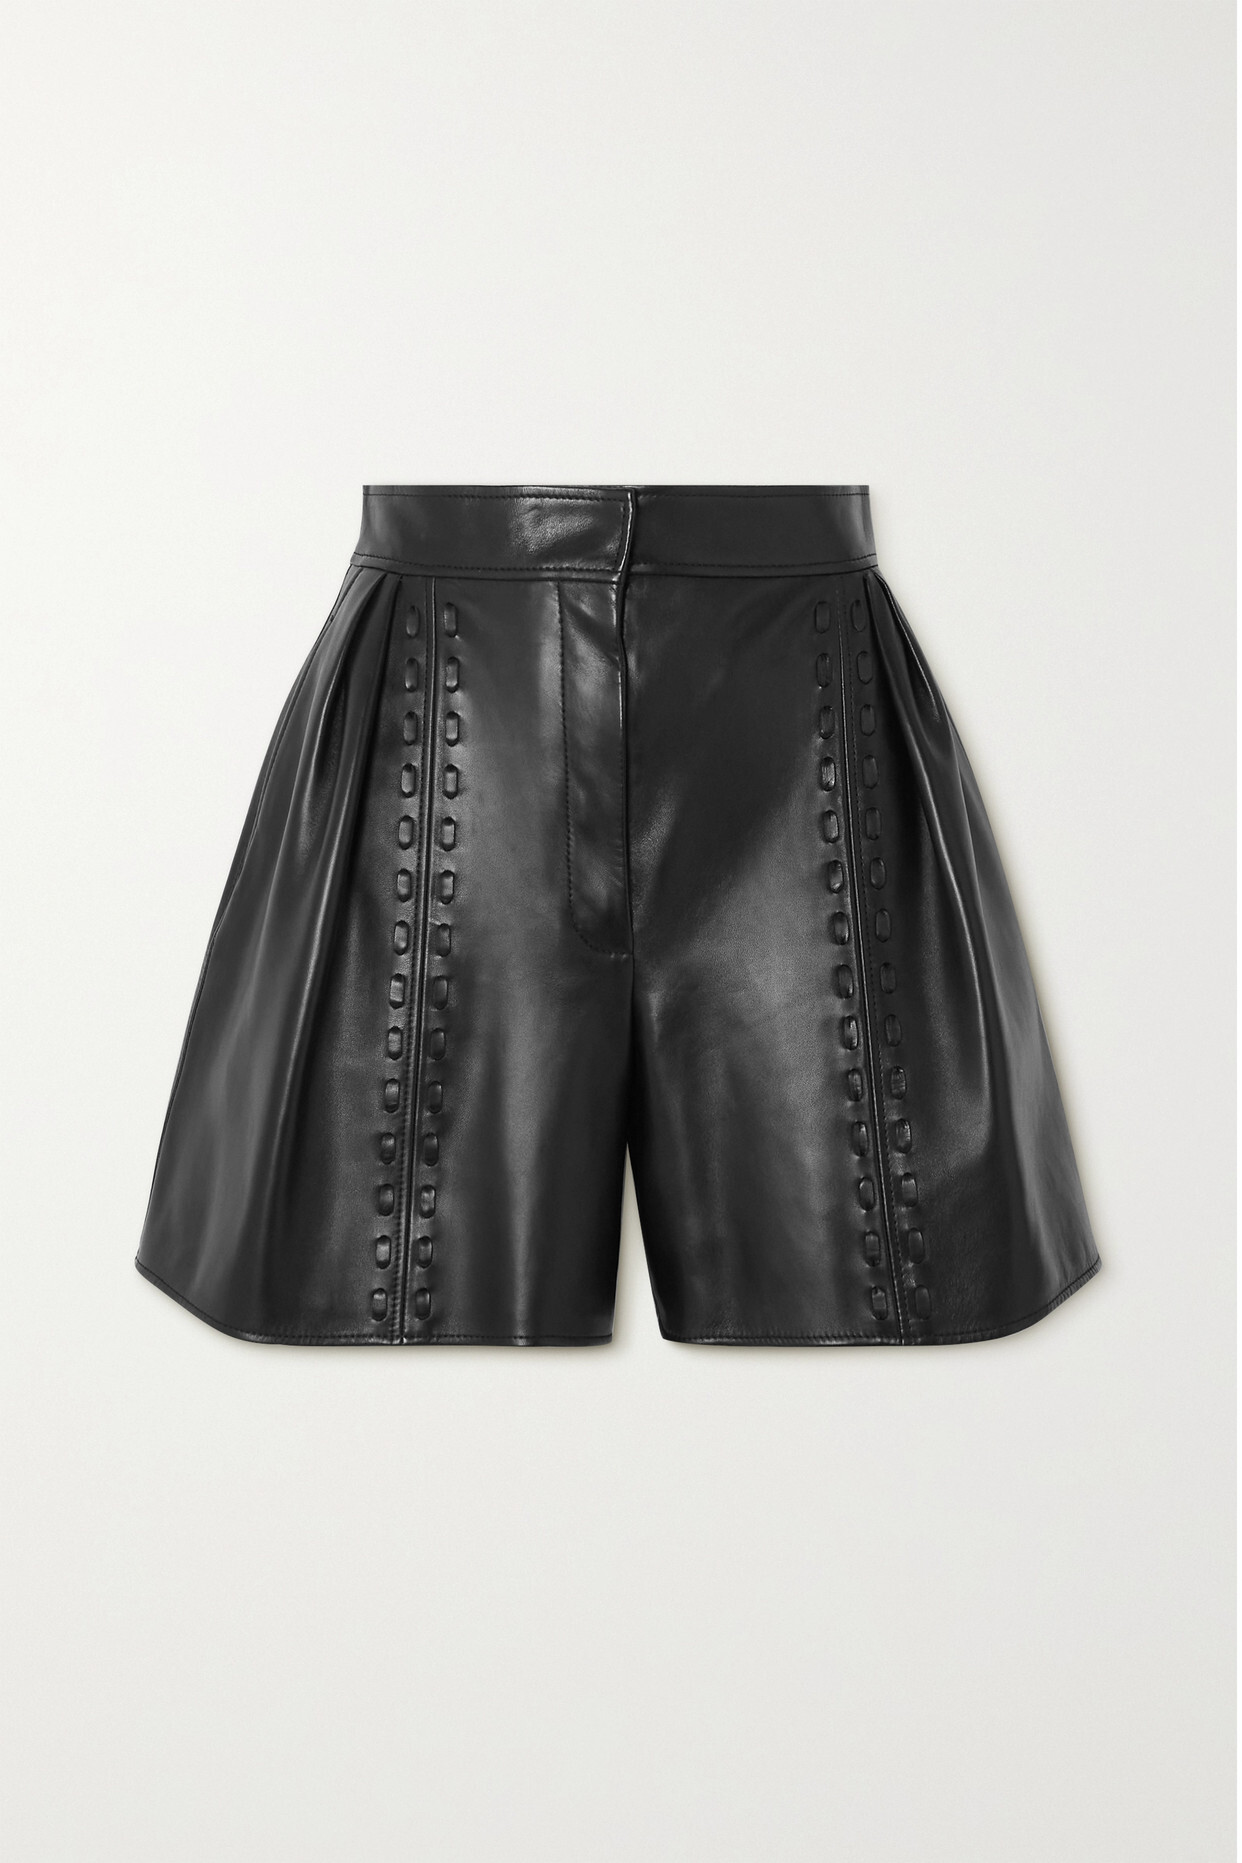 Alexander McQueen - Whipstitched Pleated Leather Shorts - Black